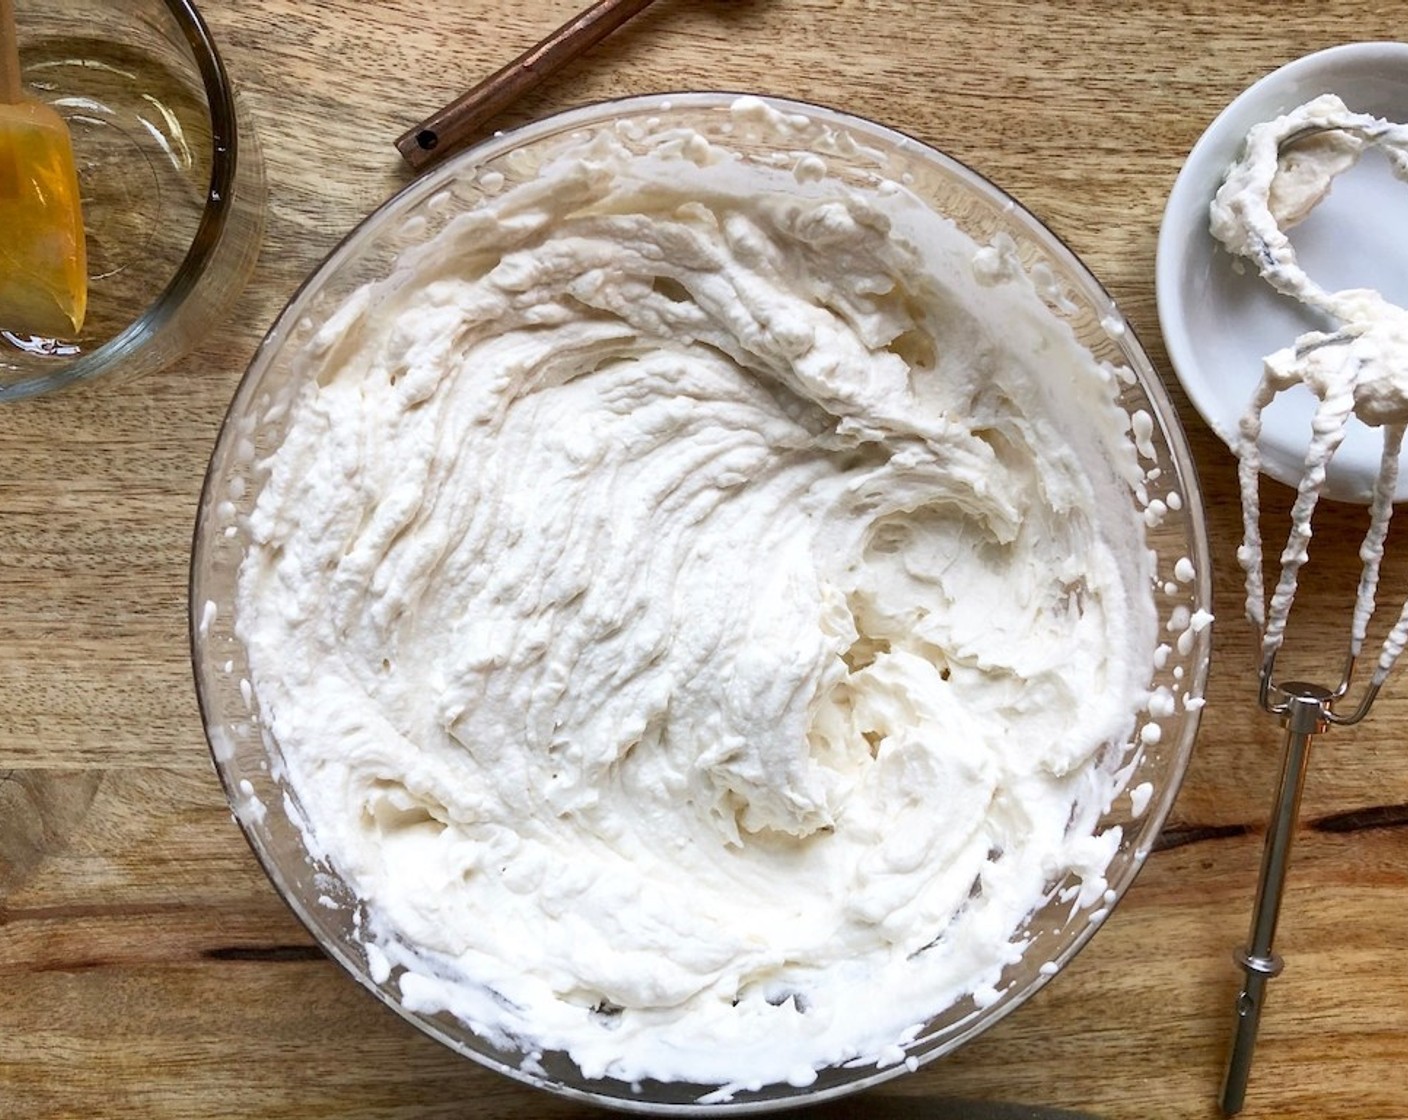 step 2 Meanwhile, prepare the Maple Whipped Cream. In the bowl of an electric mixer fitted with the whisk attachment, beat together the Heavy Cream (1 cup), Pure Maple Syrup (1/4 cup), and Salt (1/4 tsp) until soft peaks form. Cover and refrigerate until ready to use.